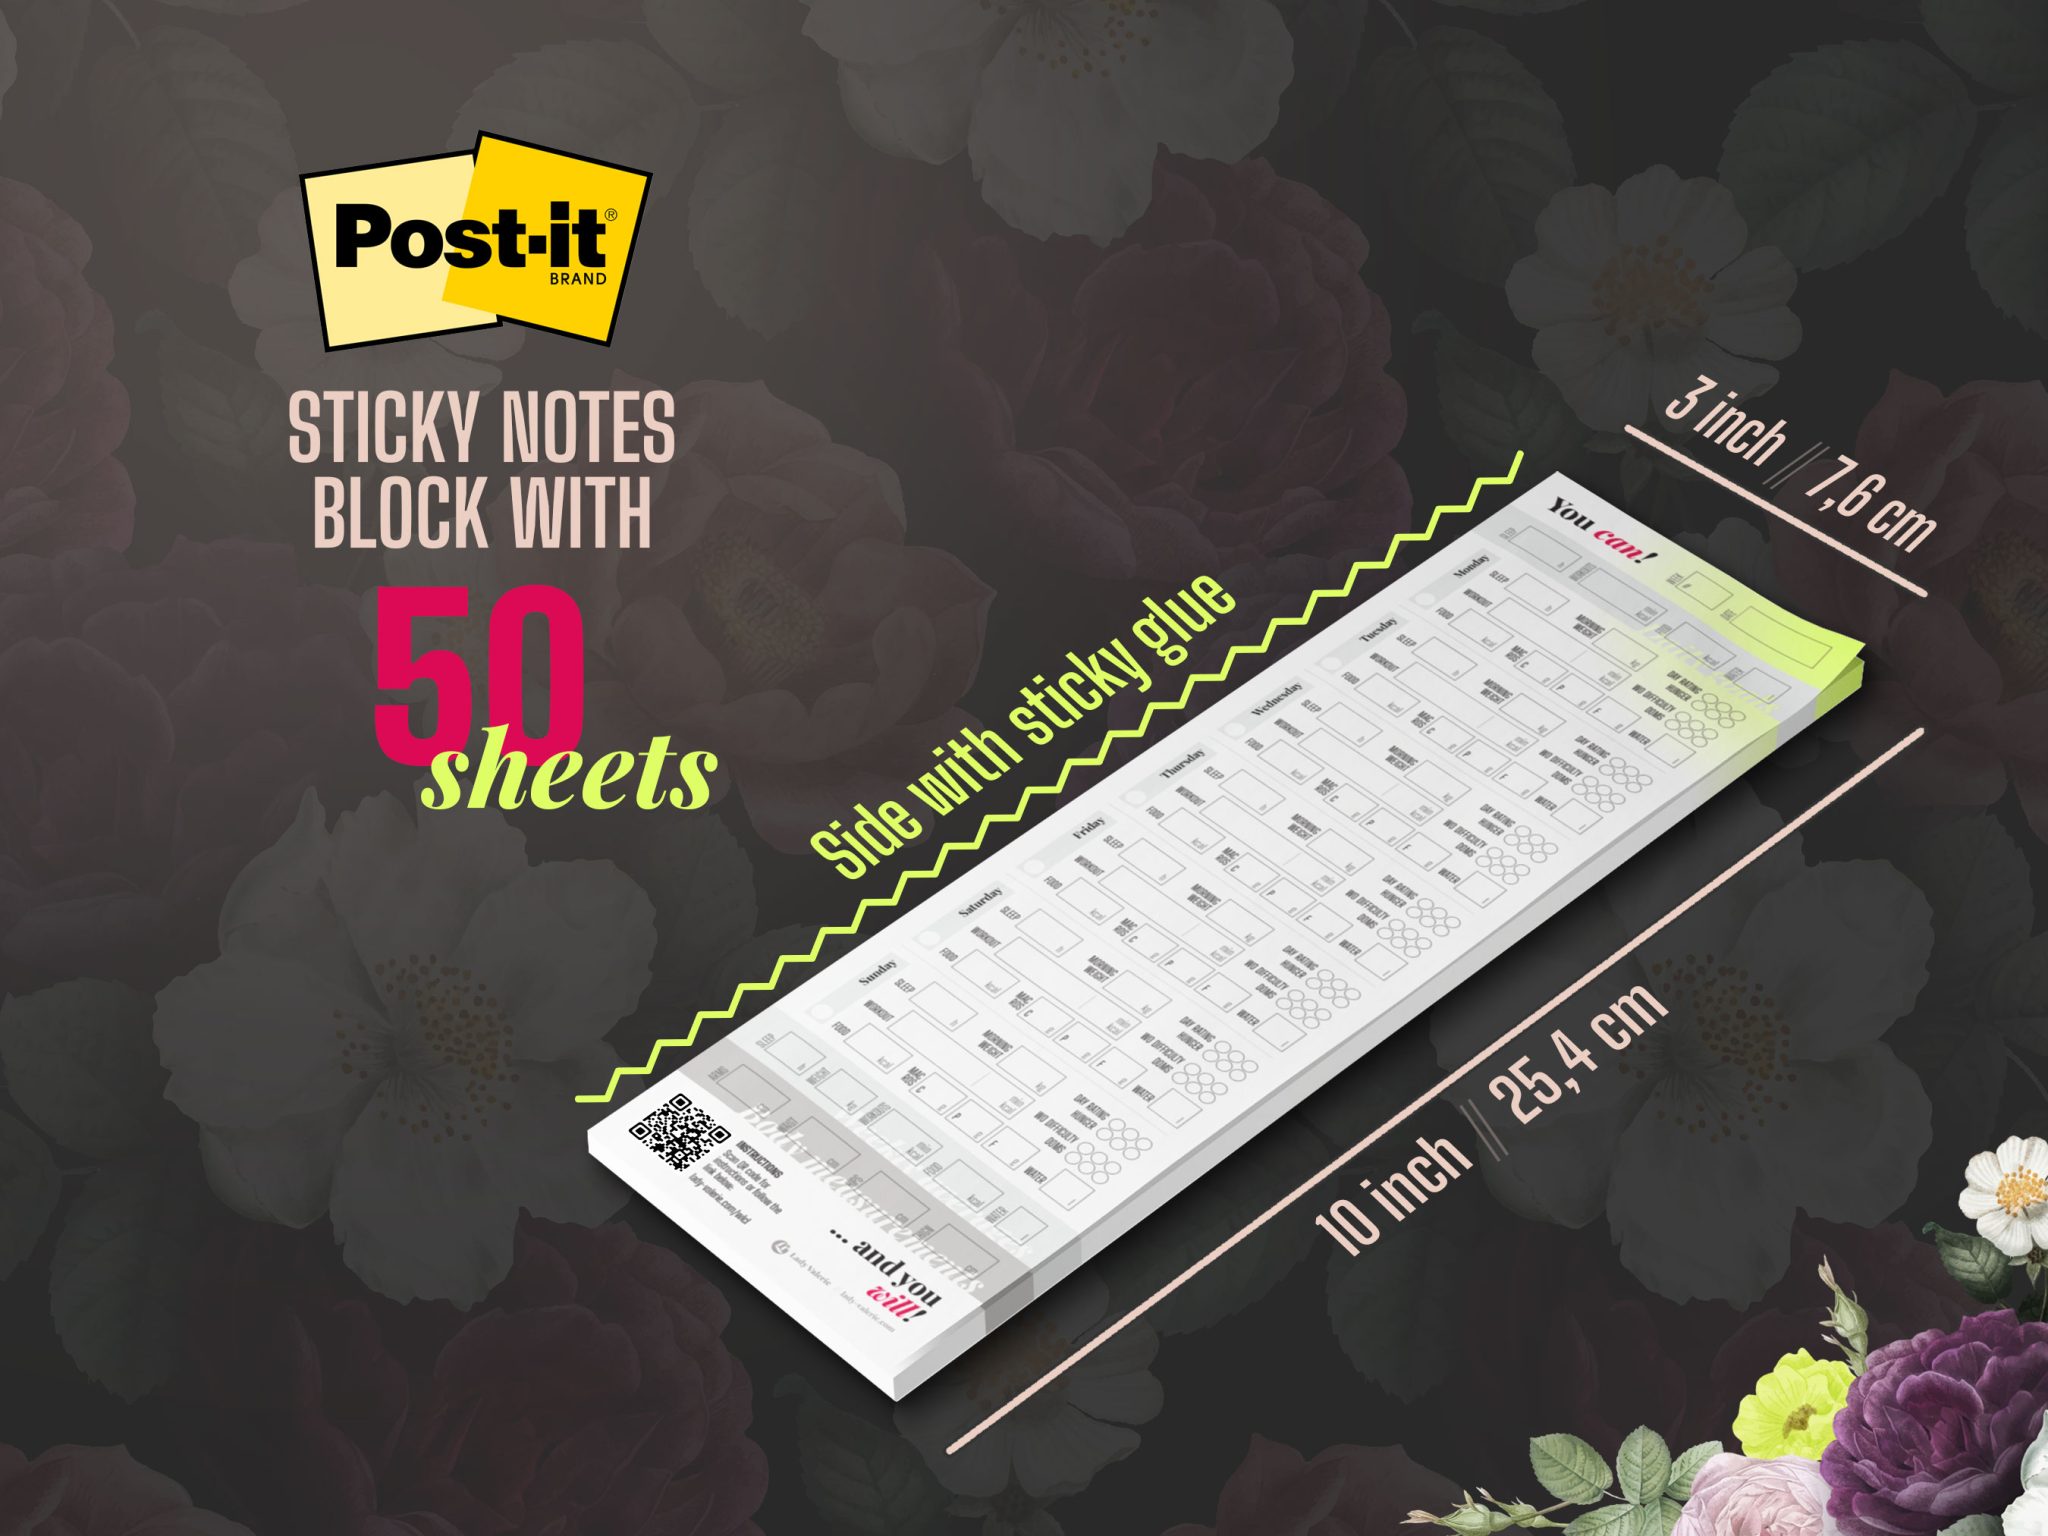 Wight loss journal on Post-itÂ® Note pads